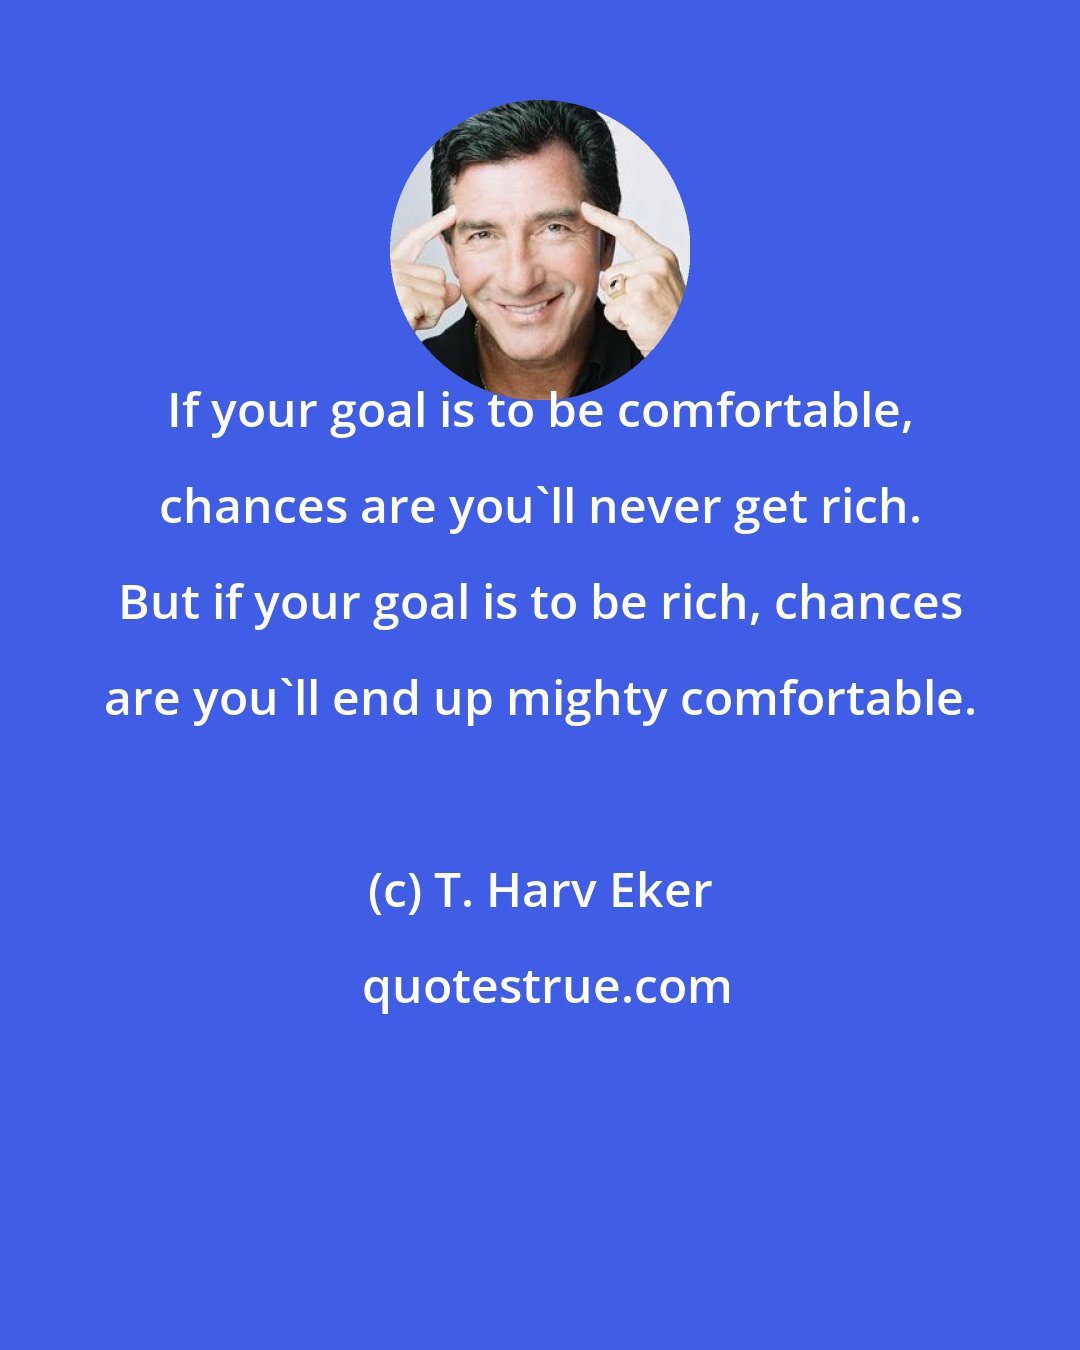 T. Harv Eker: If your goal is to be comfortable, chances are you'll never get rich. But if your goal is to be rich, chances are you'll end up mighty comfortable.